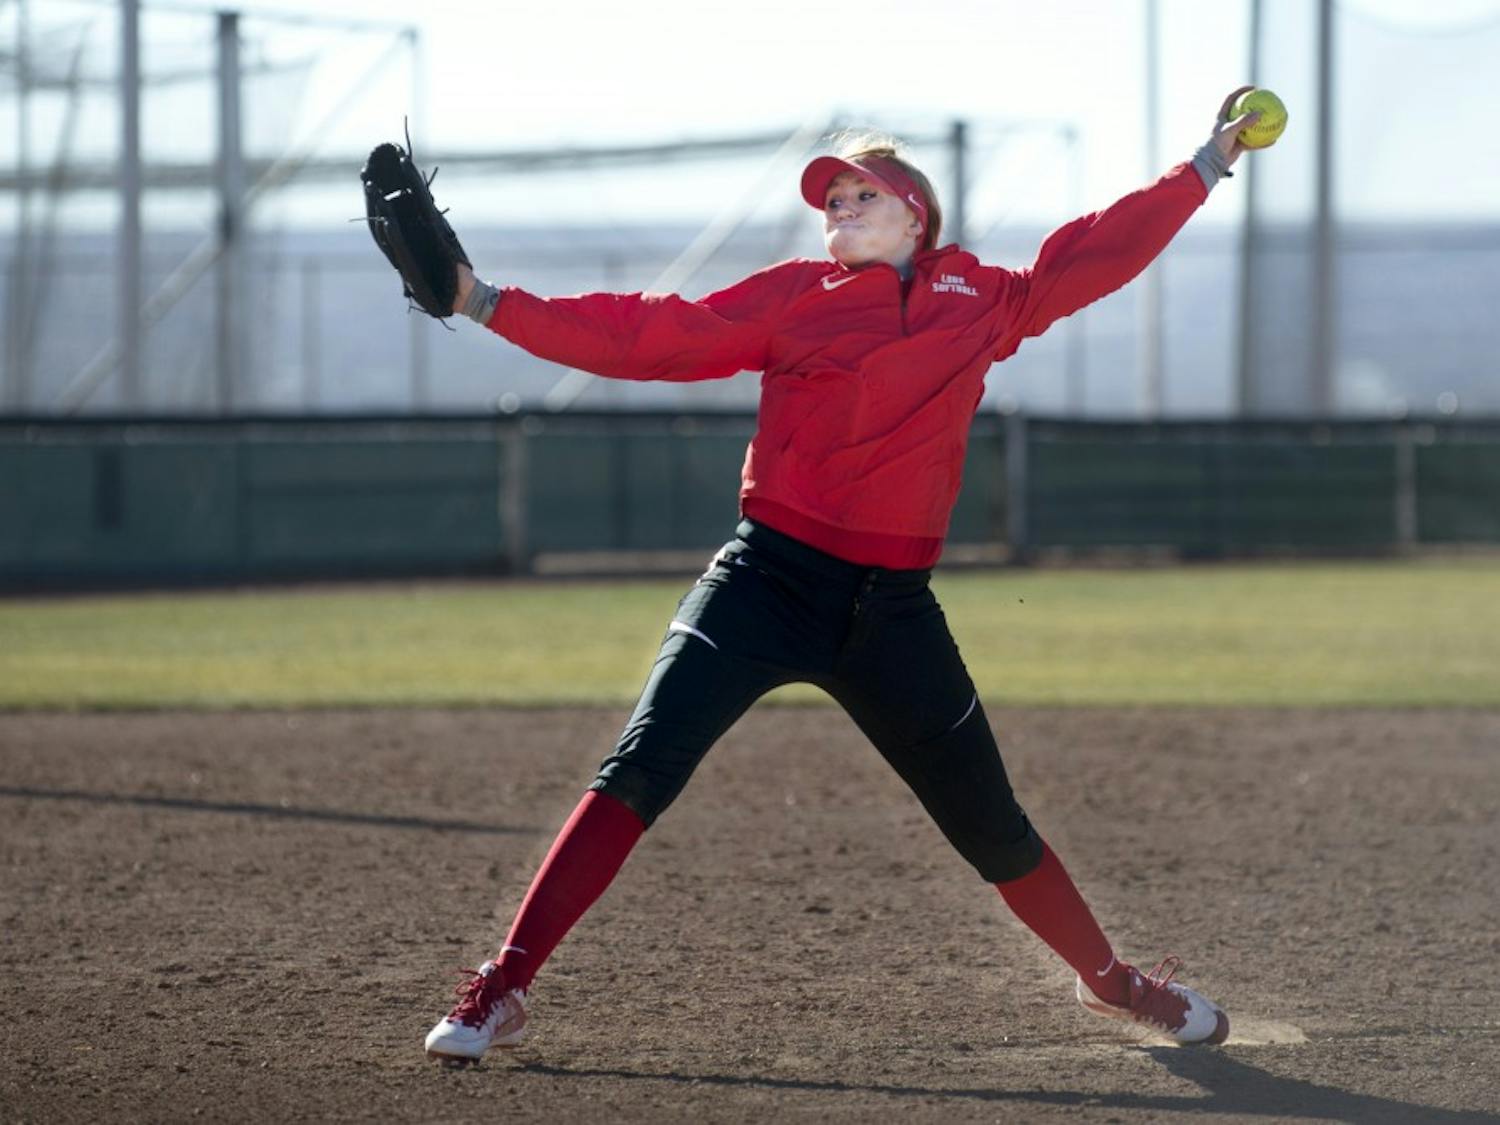 Freshman Colette Robert trains during the Lobos first practice of the season at Santa Ana Star Field. The Lobos lost to Texas A&M this past Saturday 8-7.